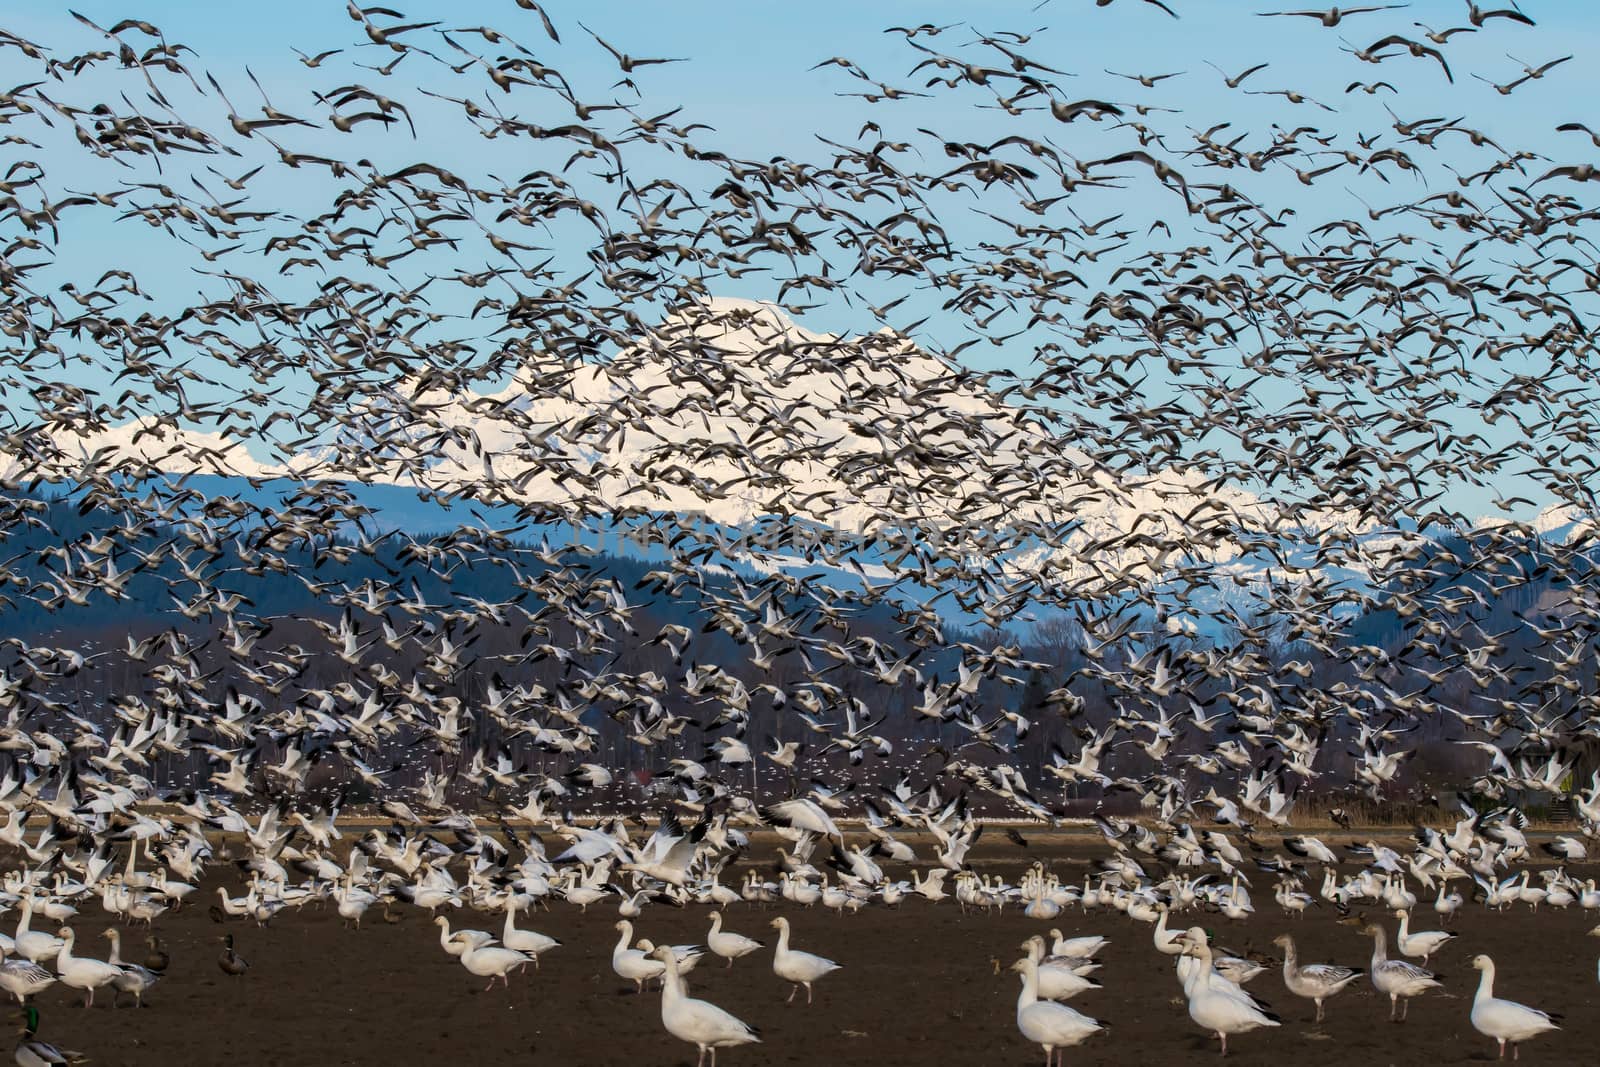 Snow Geese - Skagit Valley, WA by cestes001